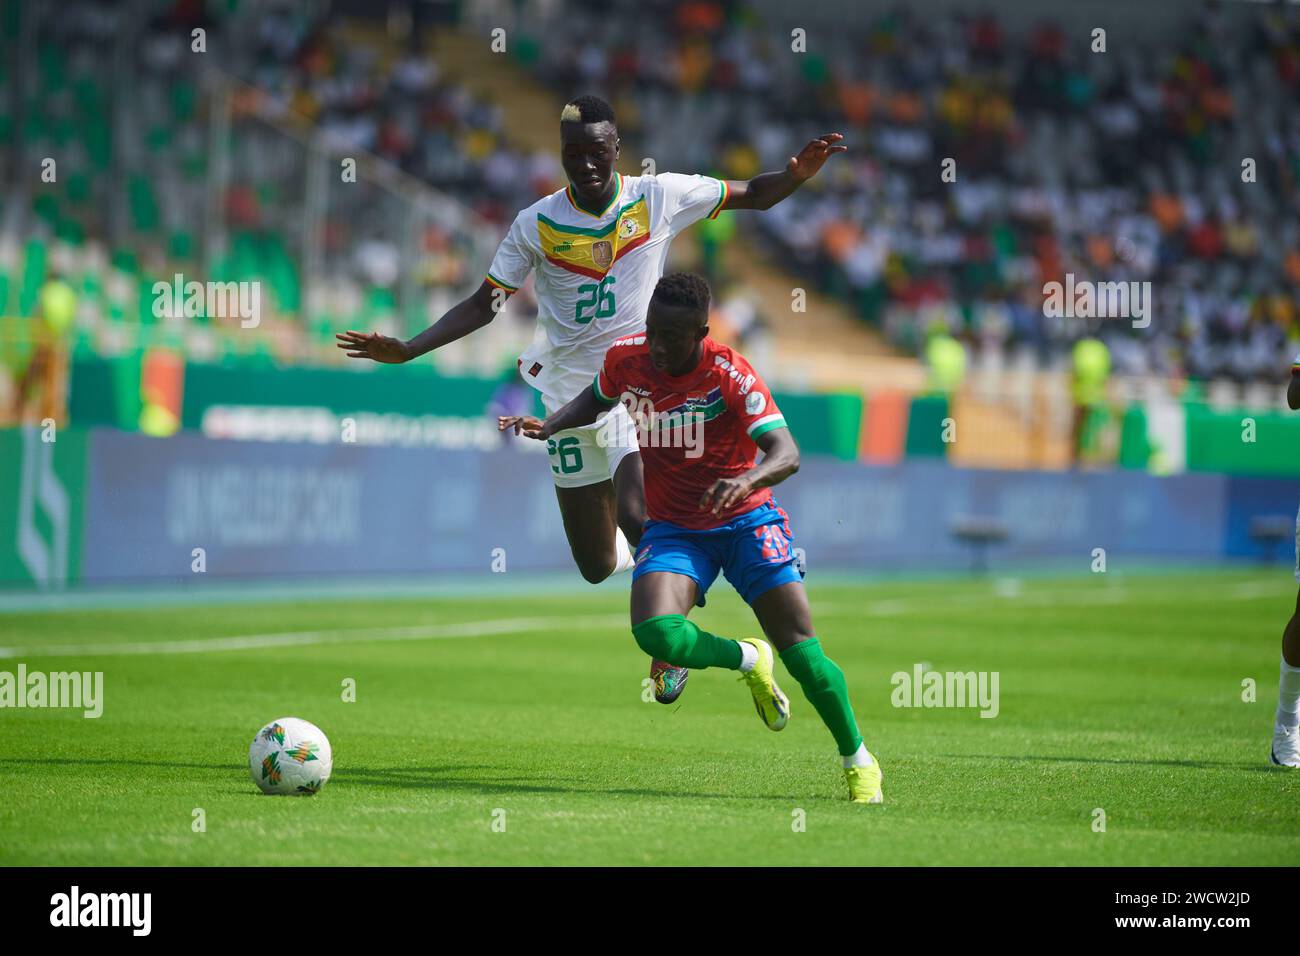 Highlight of the match between Senegal and Gambia, duel between Pape Gueye and Yankuba Minteh Stock Photo